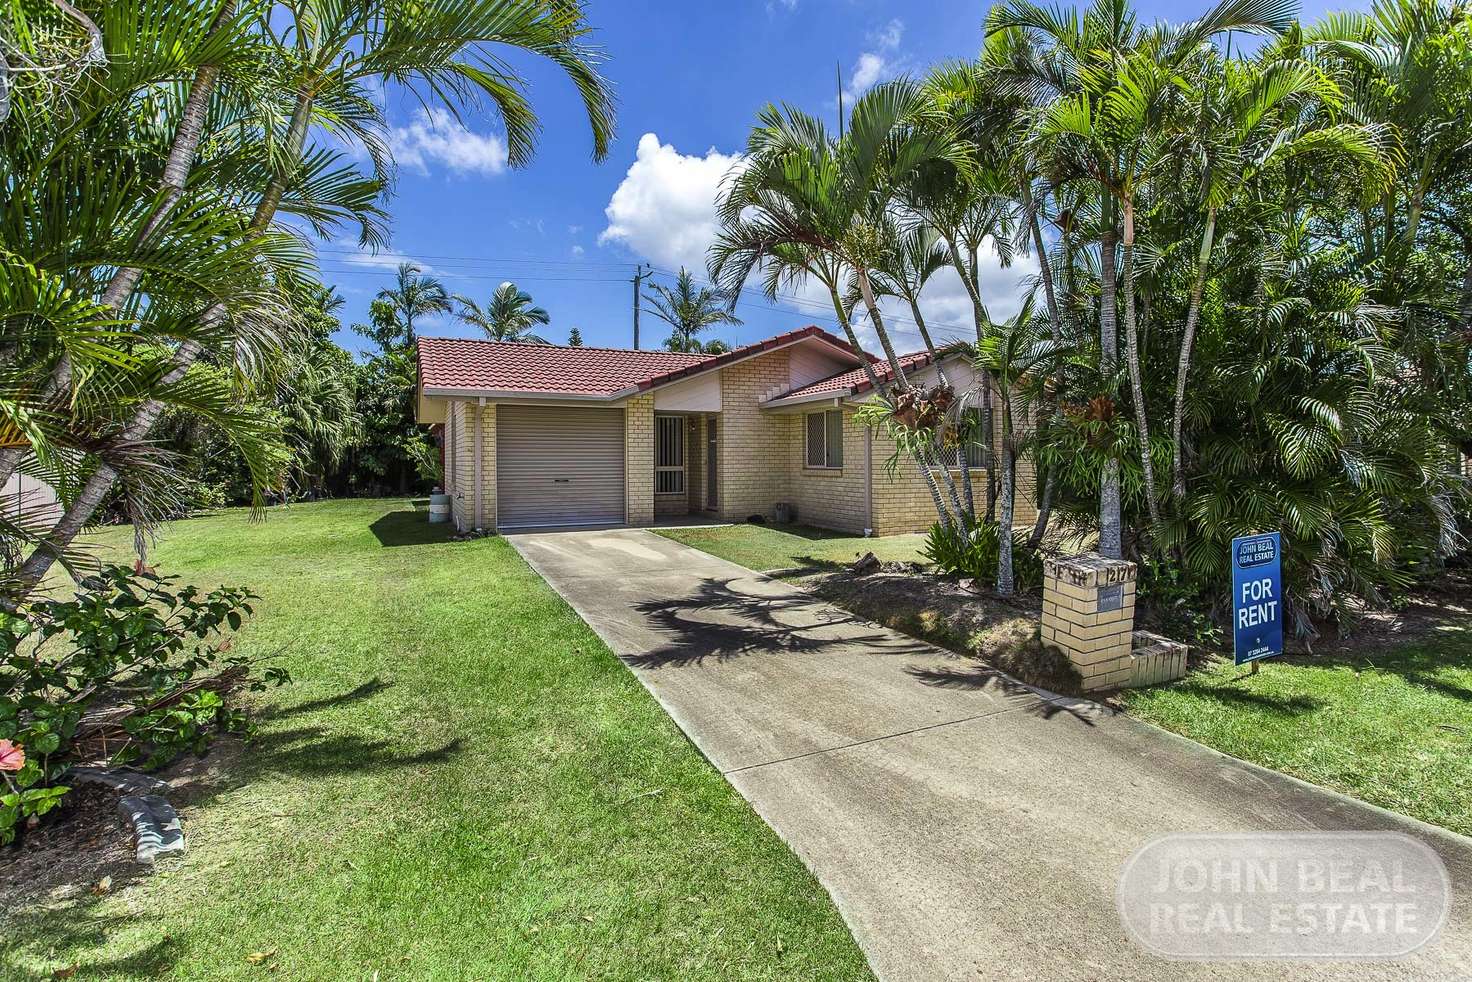 Main view of Homely house listing, 27 Cremorne Ct, Kippa-ring QLD 4021